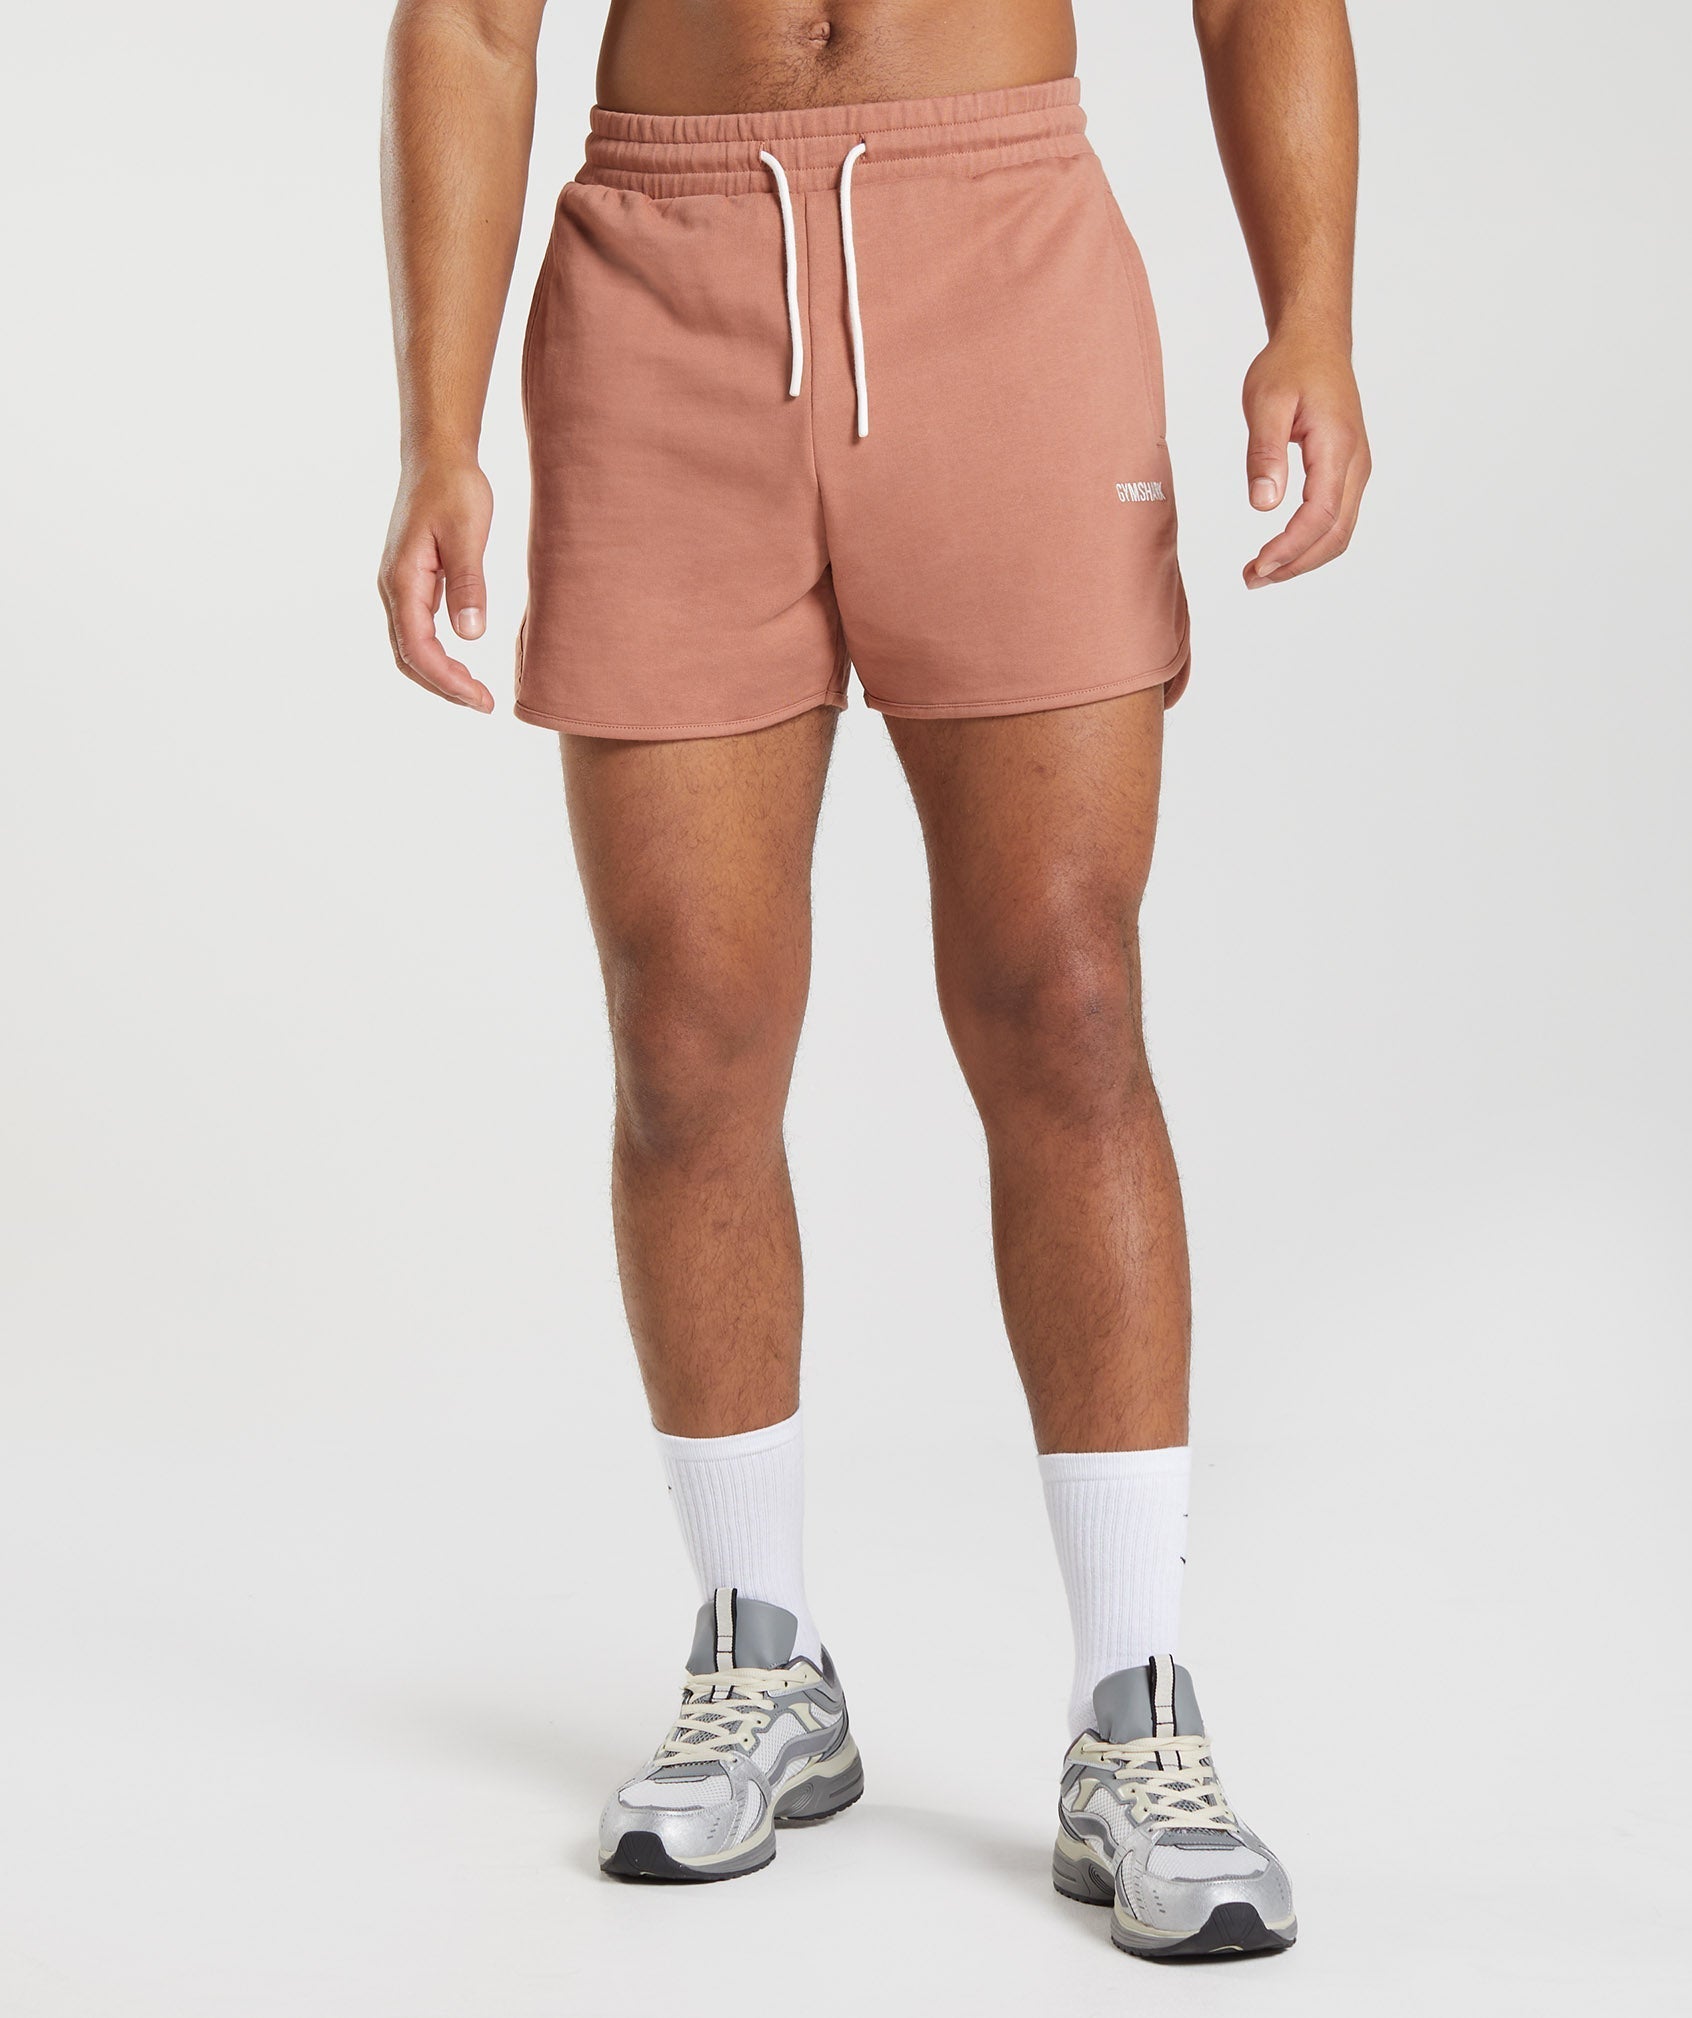 Rest Day Sweats 4'' Lounge Shorts in Toffee Brown - view 2